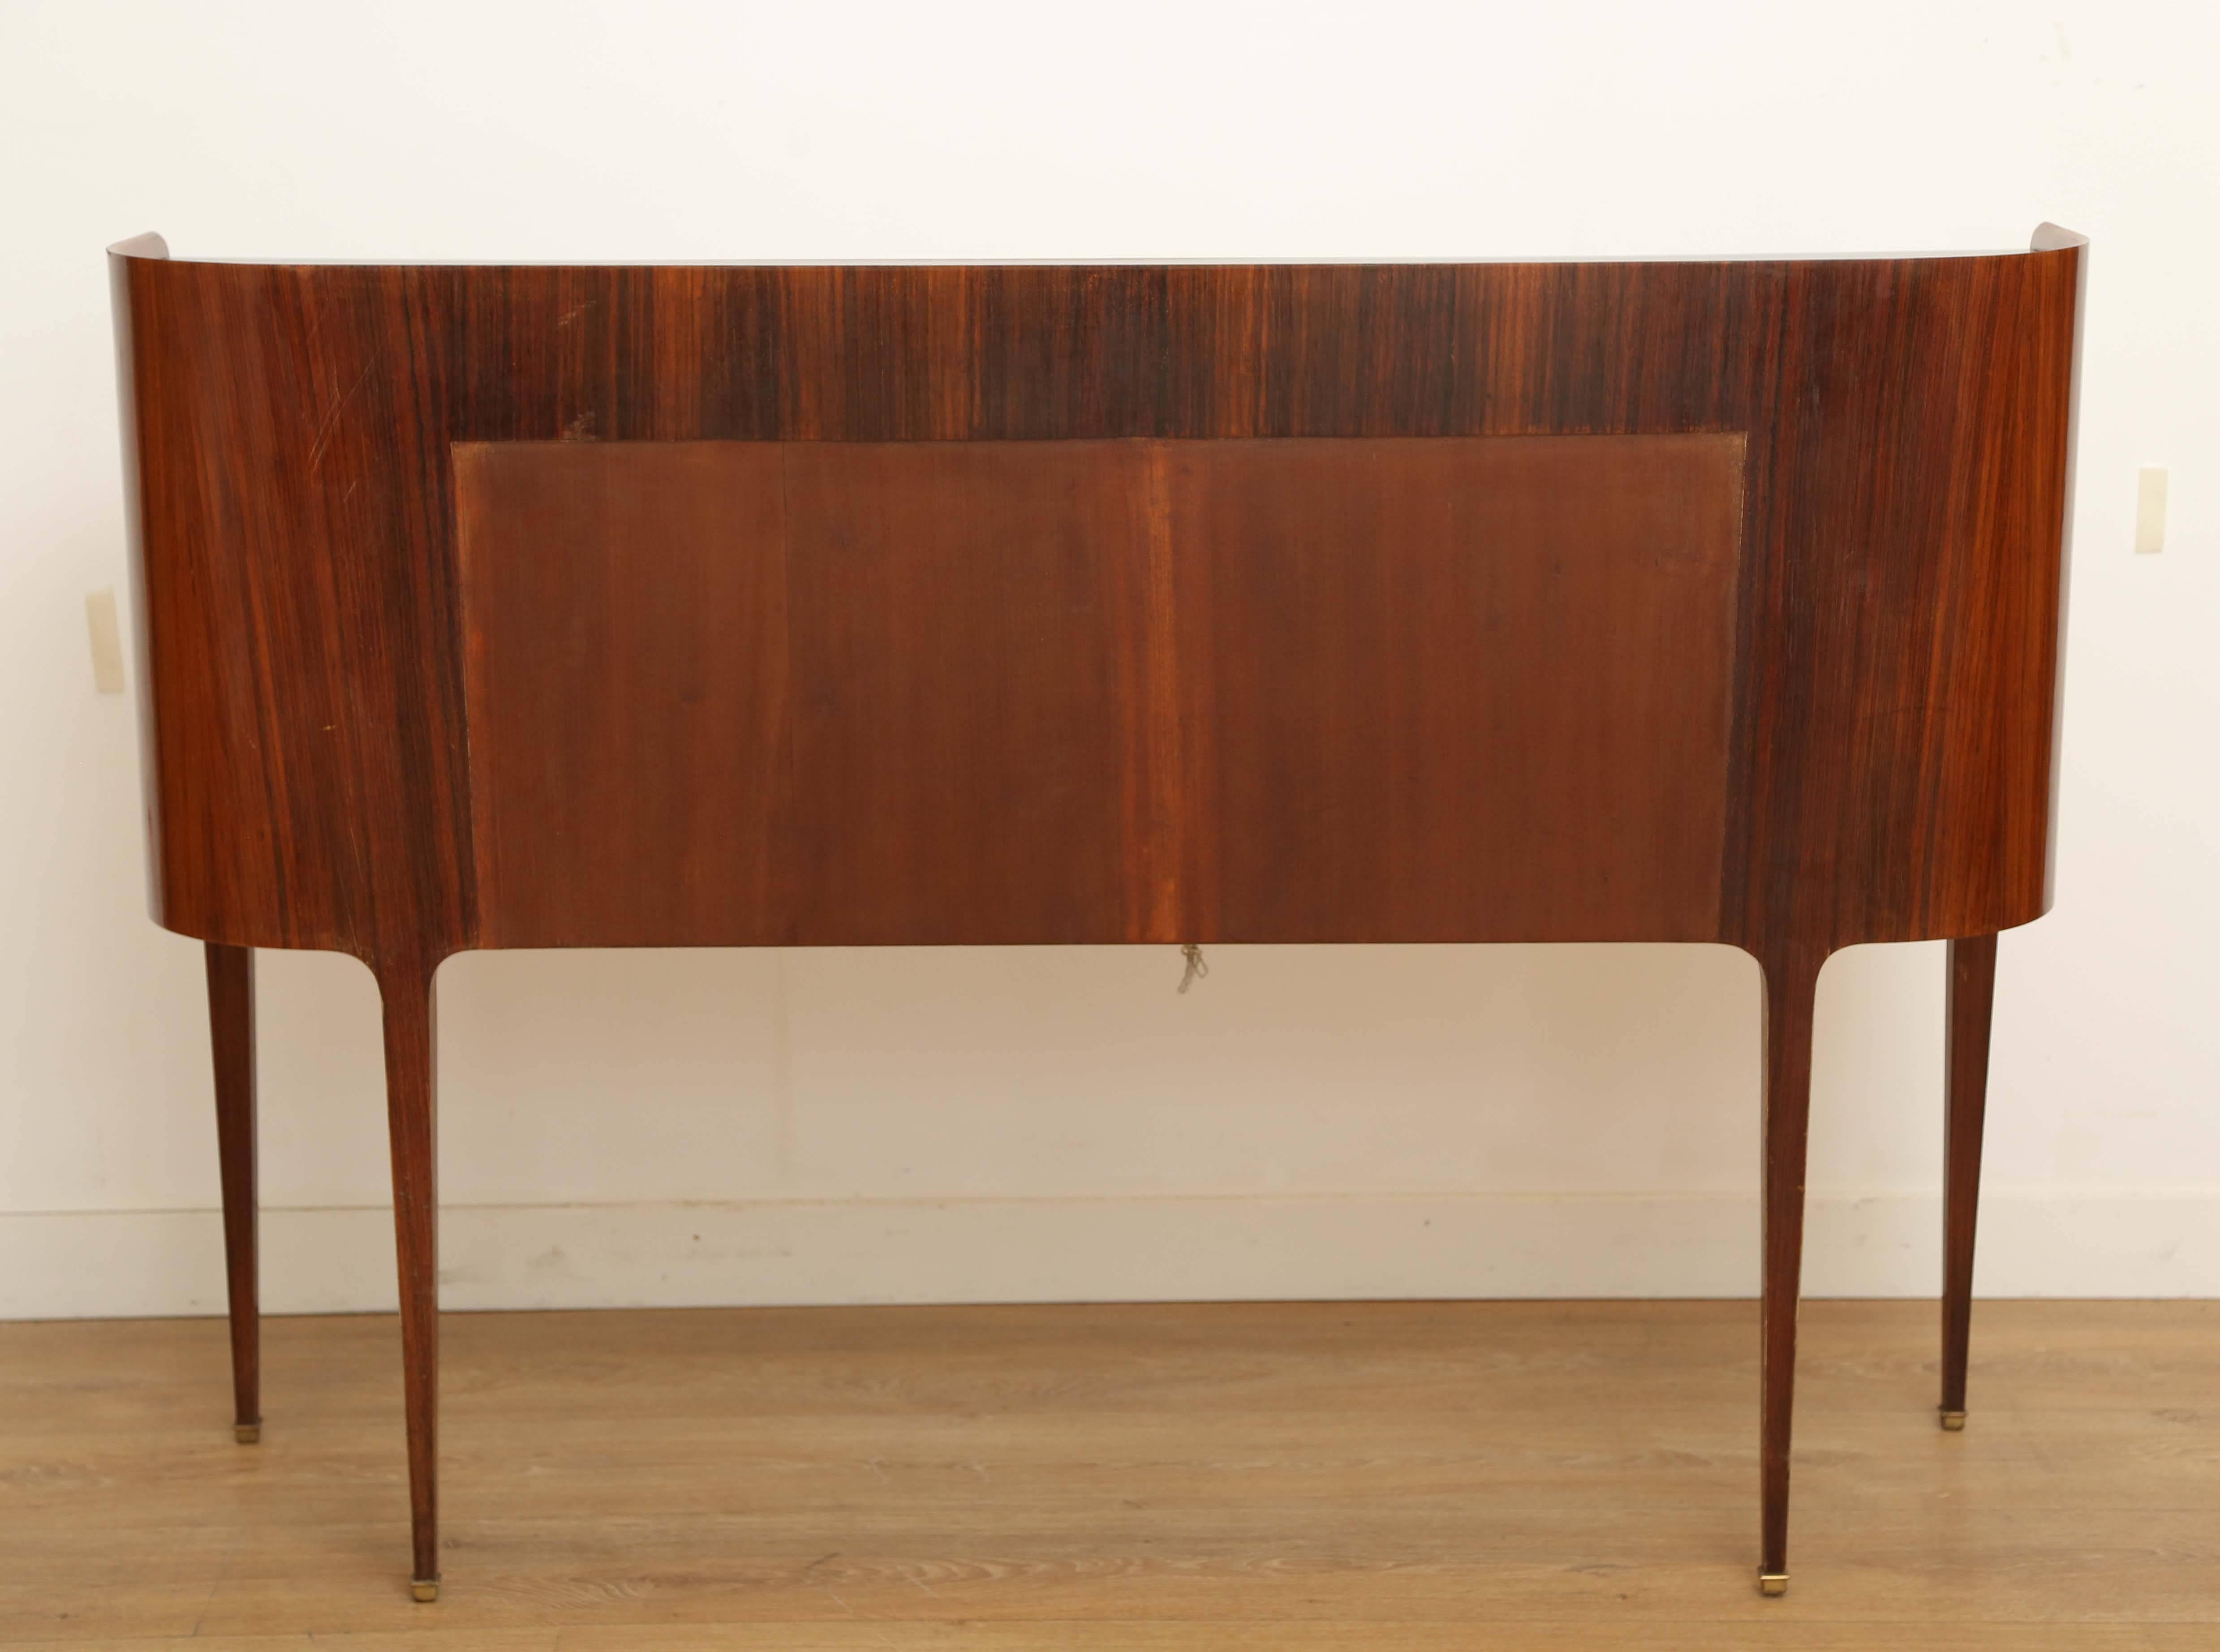 Rare mid-century modern dry bar cabinet by Paool Buffa. Graciously curved Indian rosewood encasement with a drop down front open to a full-service bar with plenty of room. Tapered legs with bronze sabots. Burgundy inset glass top. Maple interior